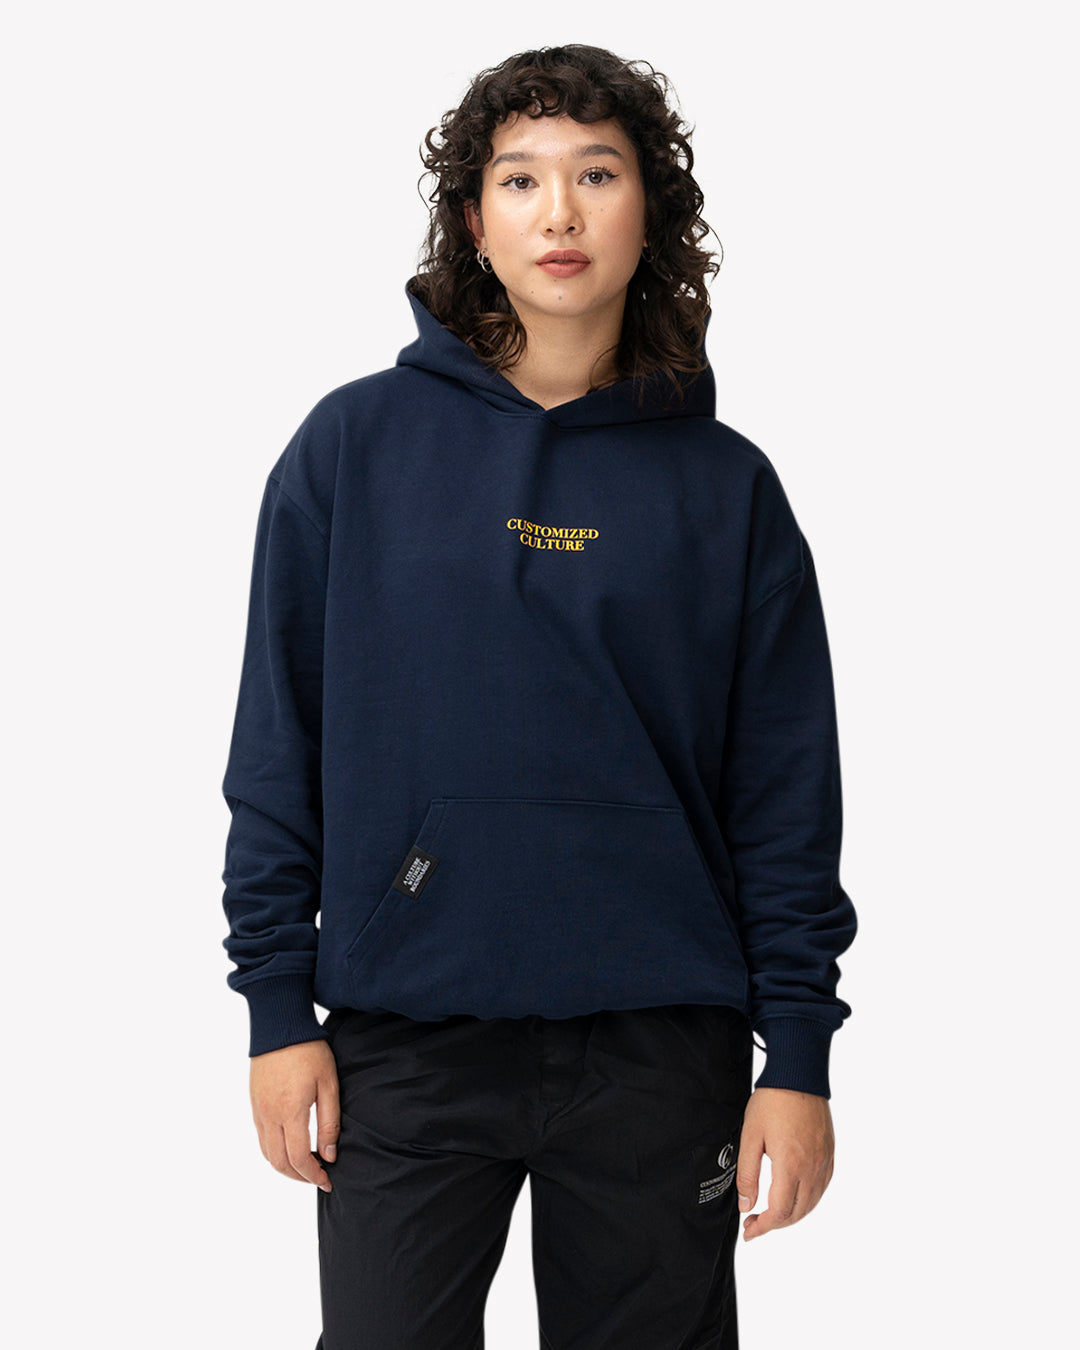 Culture Hoodie Navy | Customized Culture